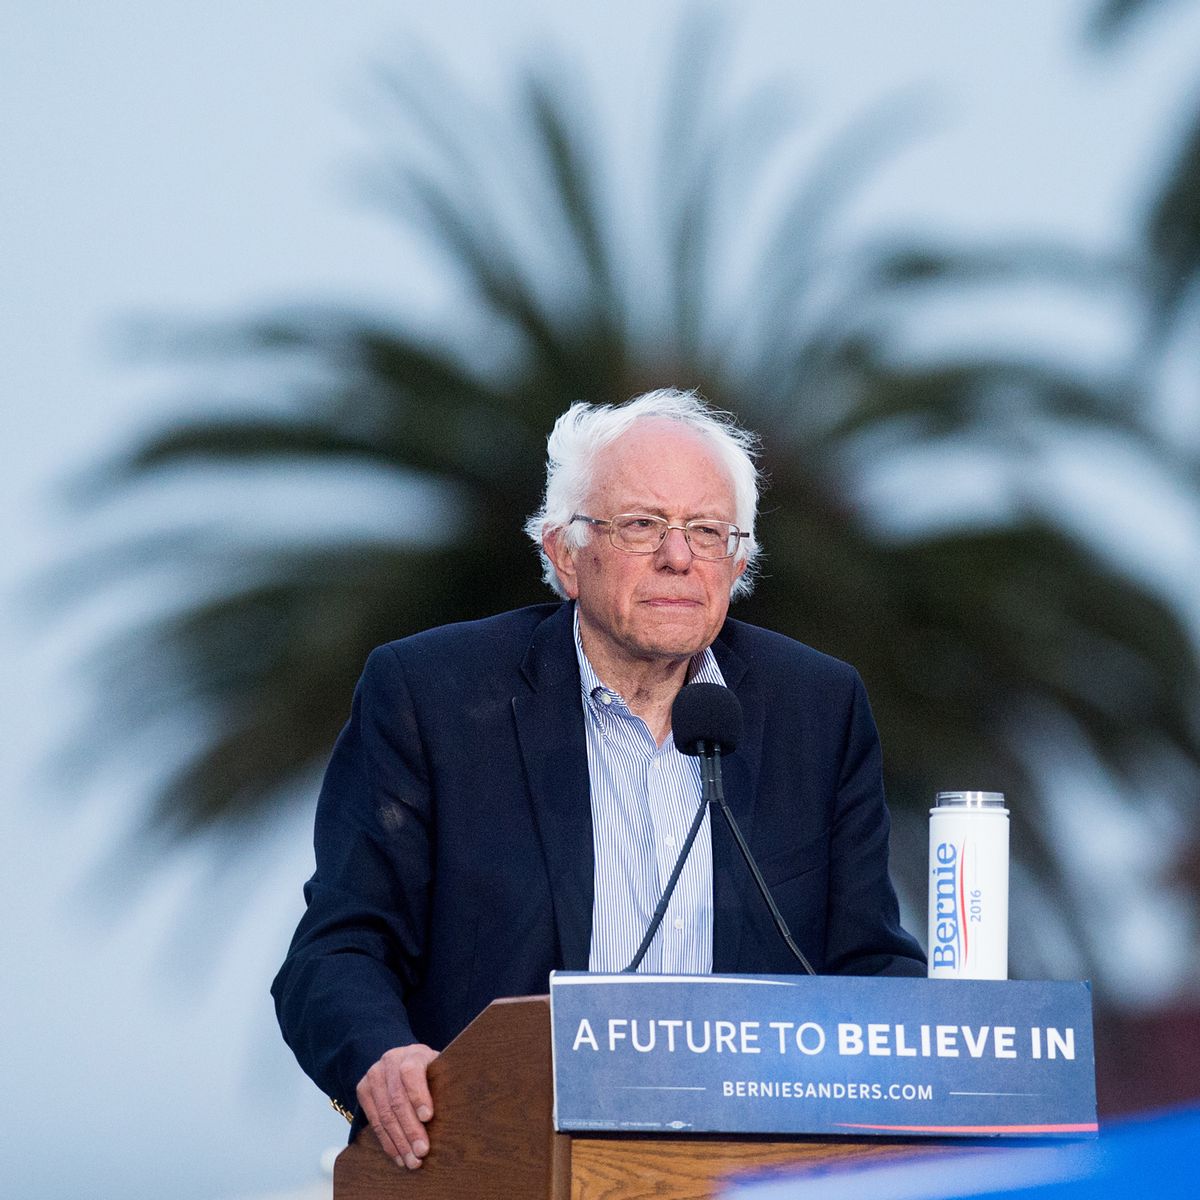 On the eve of California's primary, Democratic presidential candidate Sen. Bernie Sanders, I-Vt., addresses supporters on Monday, June 6, 2016, in San Francisco. (AP Photo/Noah Berger) (AP)